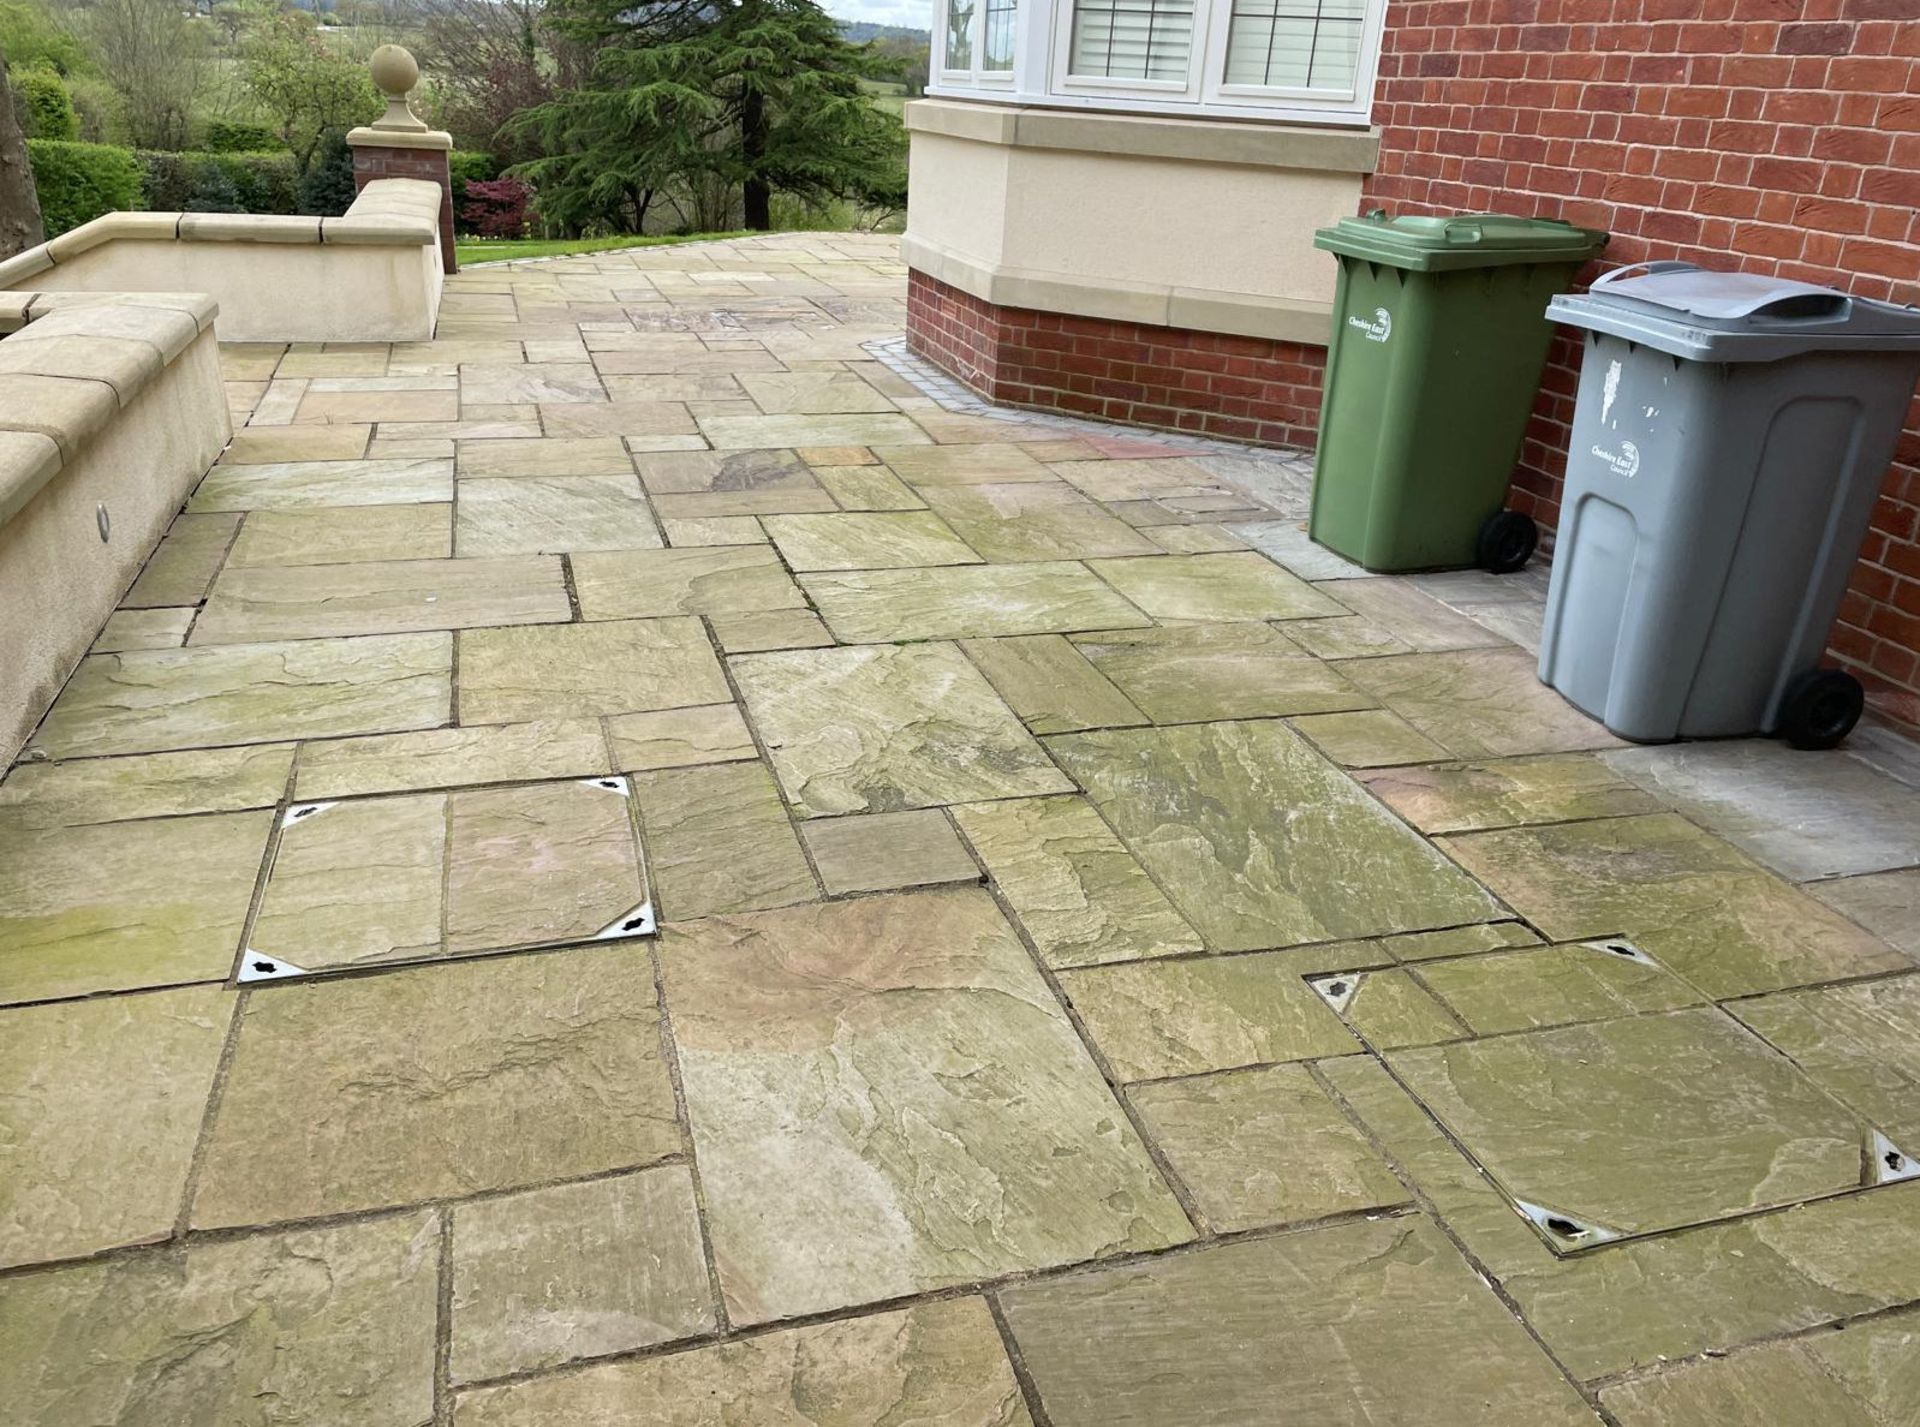 Large Quantity of Yorkstone Paving - Over 340sqm - CL896 - NO VAT ON THE HAMMER - Location: Wilmslow - Image 53 of 57